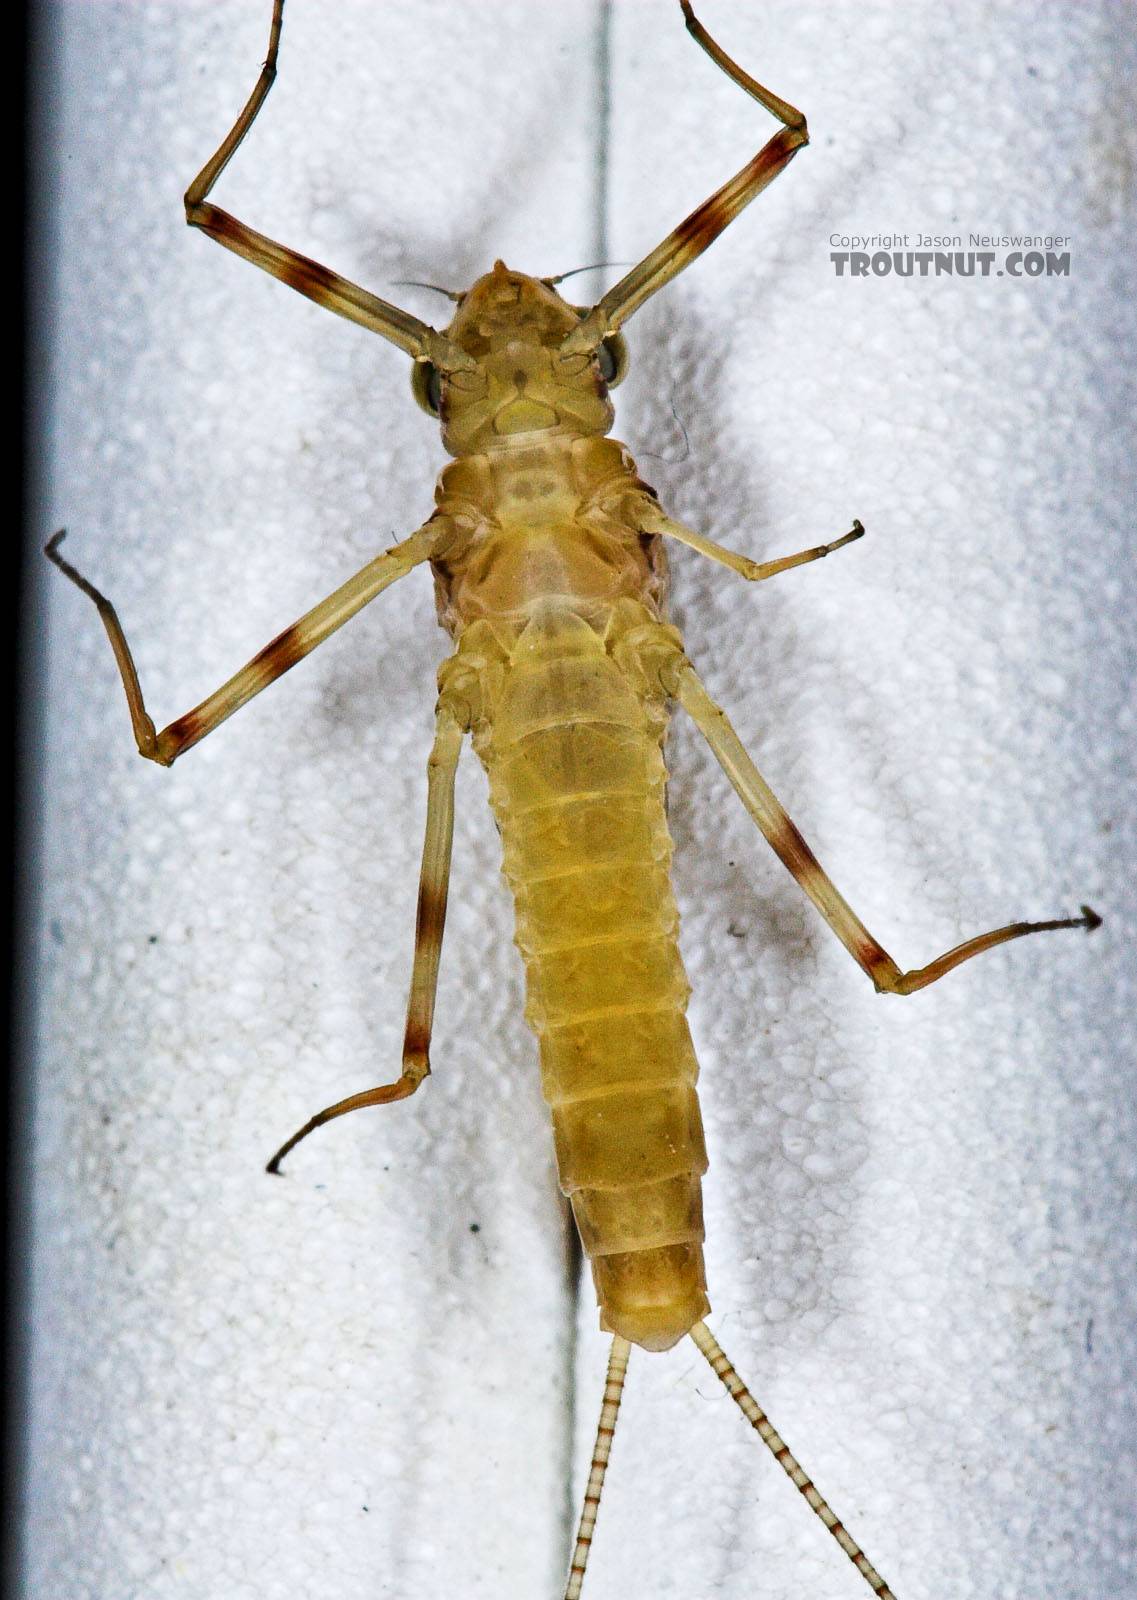 Female Maccaffertium (March Browns and Cahills) Mayfly Dun from the Neversink River in New York